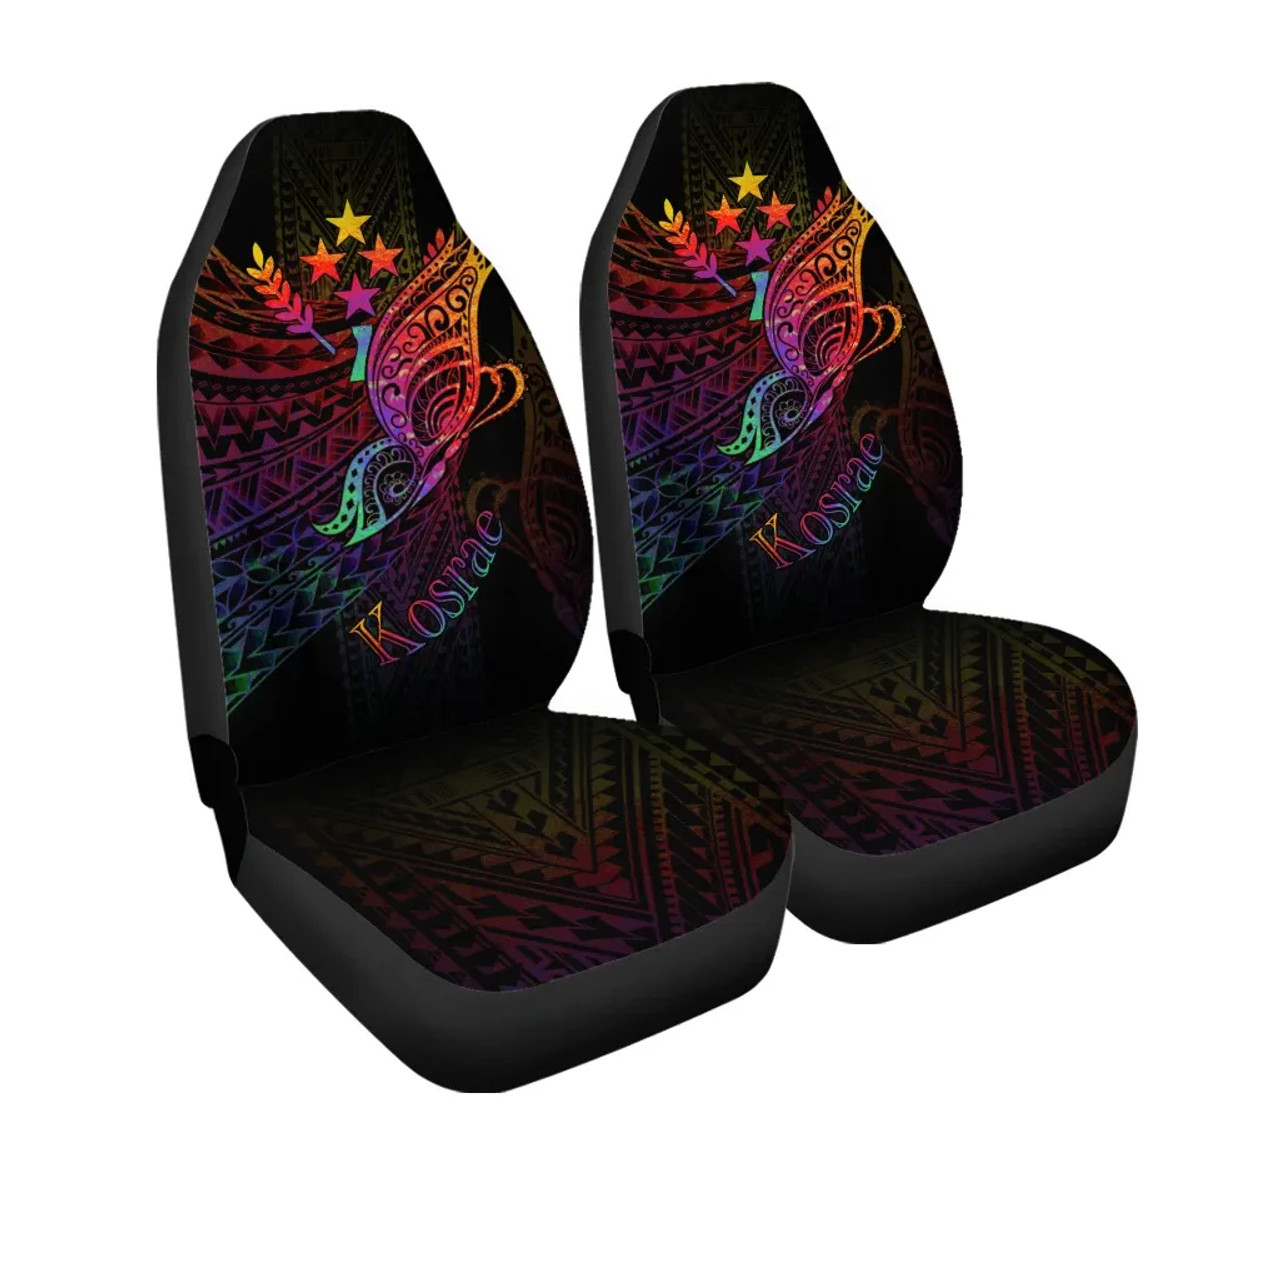 Kosrae State Car Seat Cover - Butterfly Polynesian Style